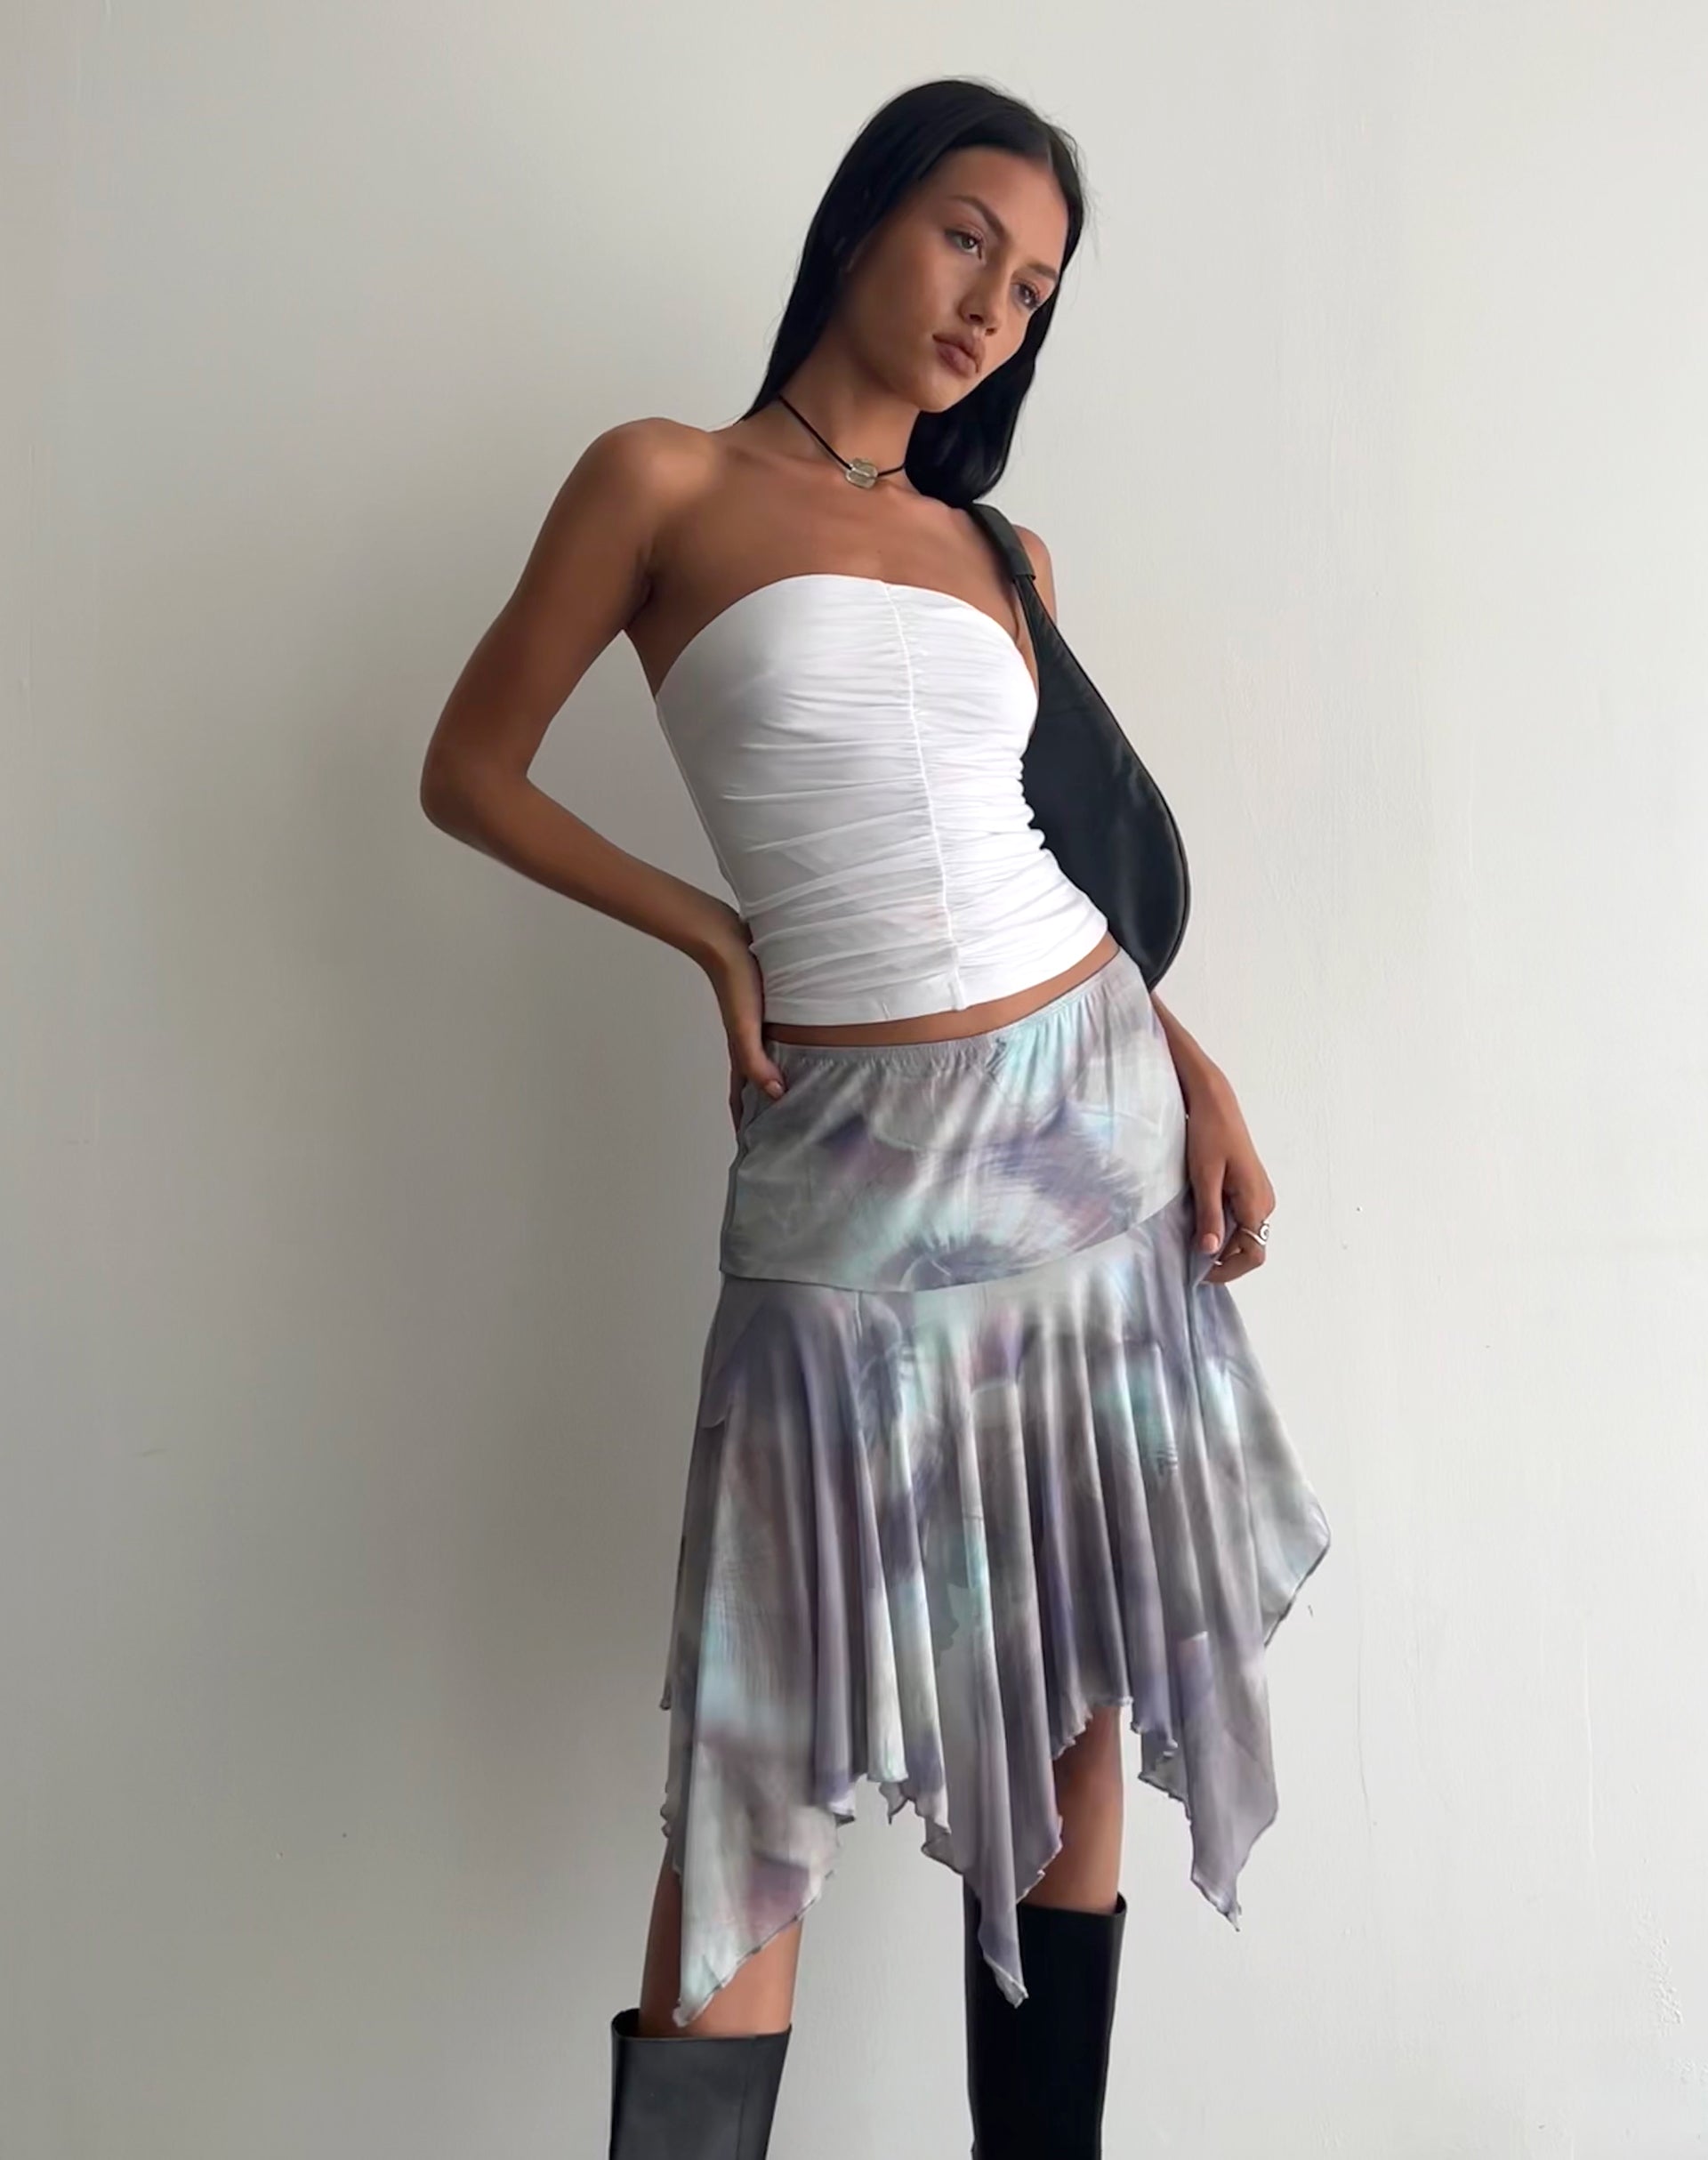 Image of Jovali Low Waist Midi Skirt in Mesh Printed Pearly Shell